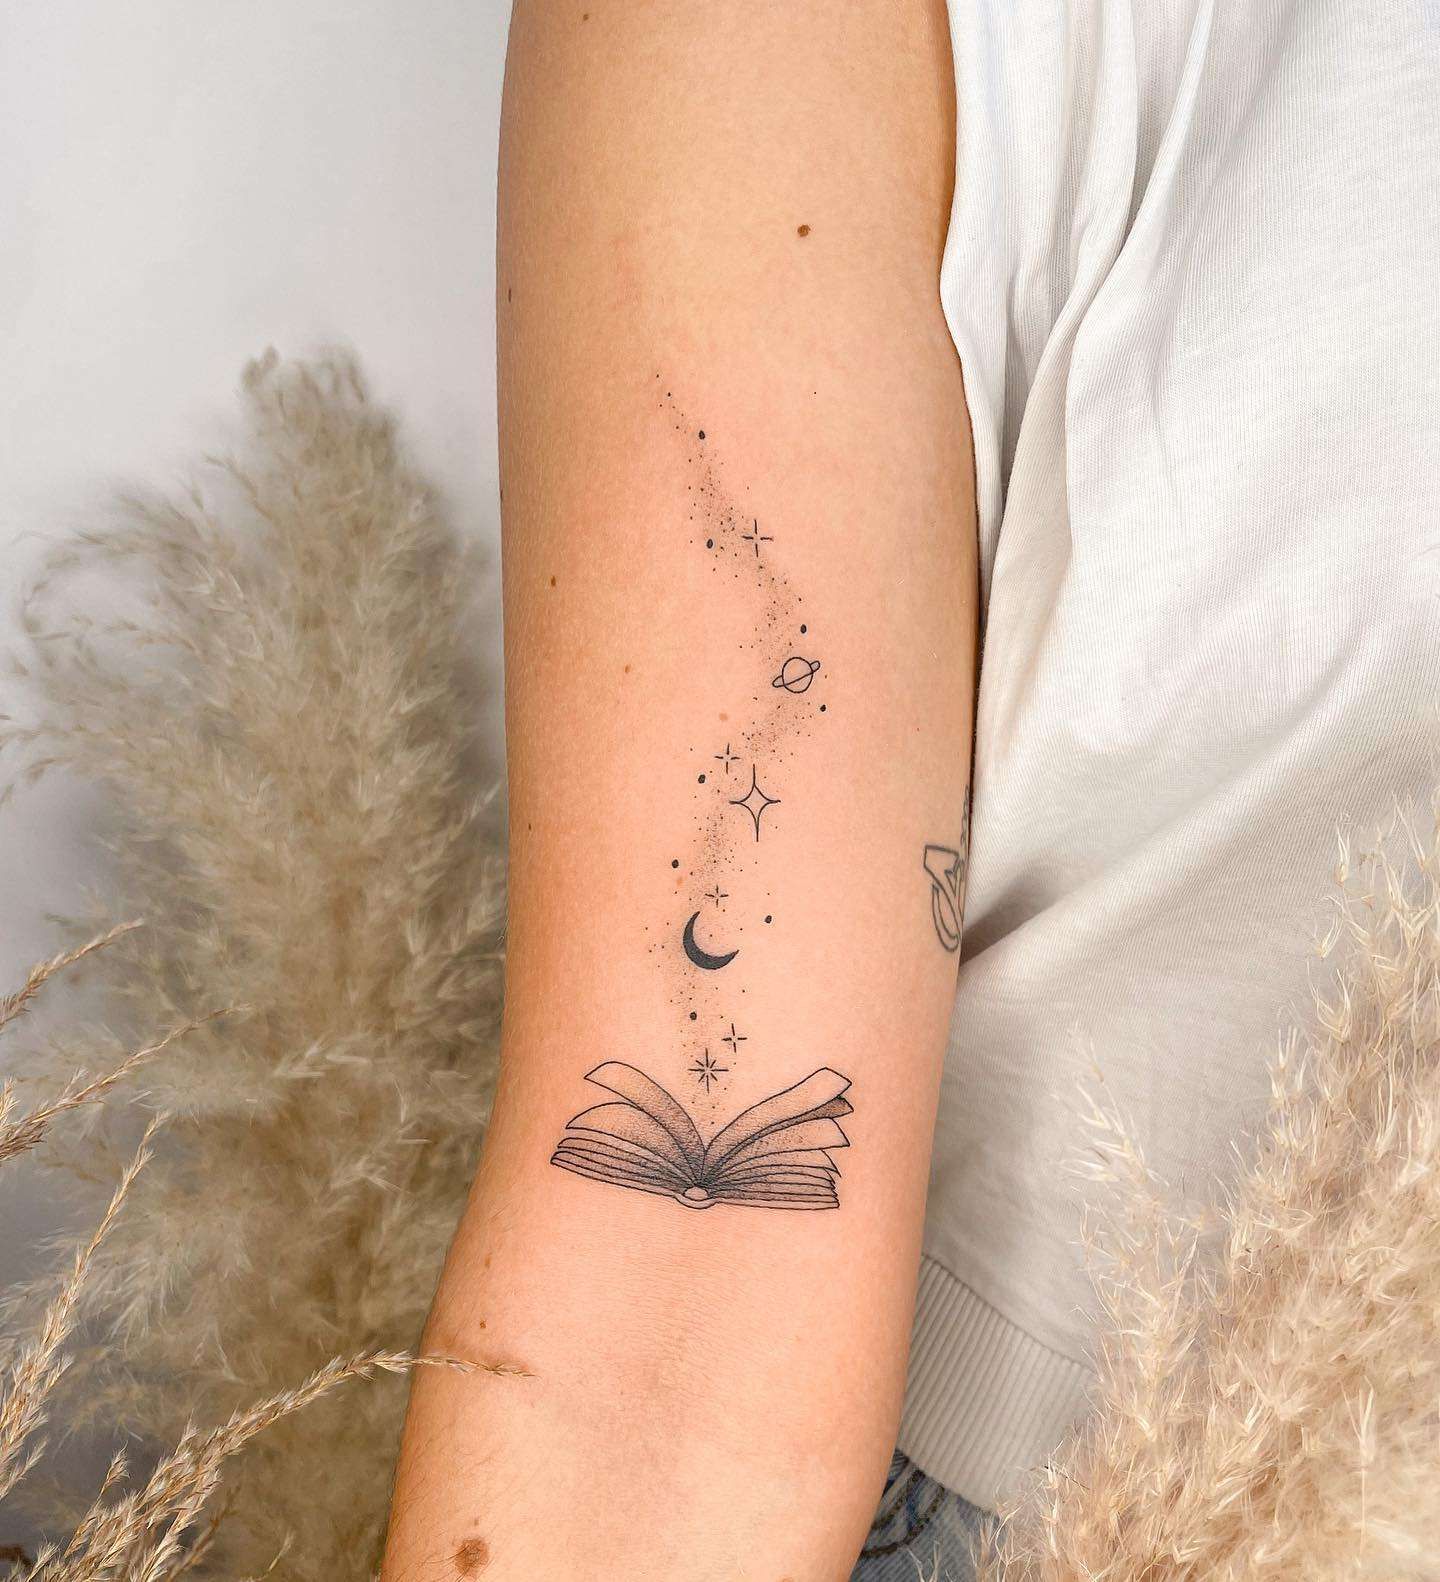 The Literary Connection: Book Tattoos as
Symbols of Passion